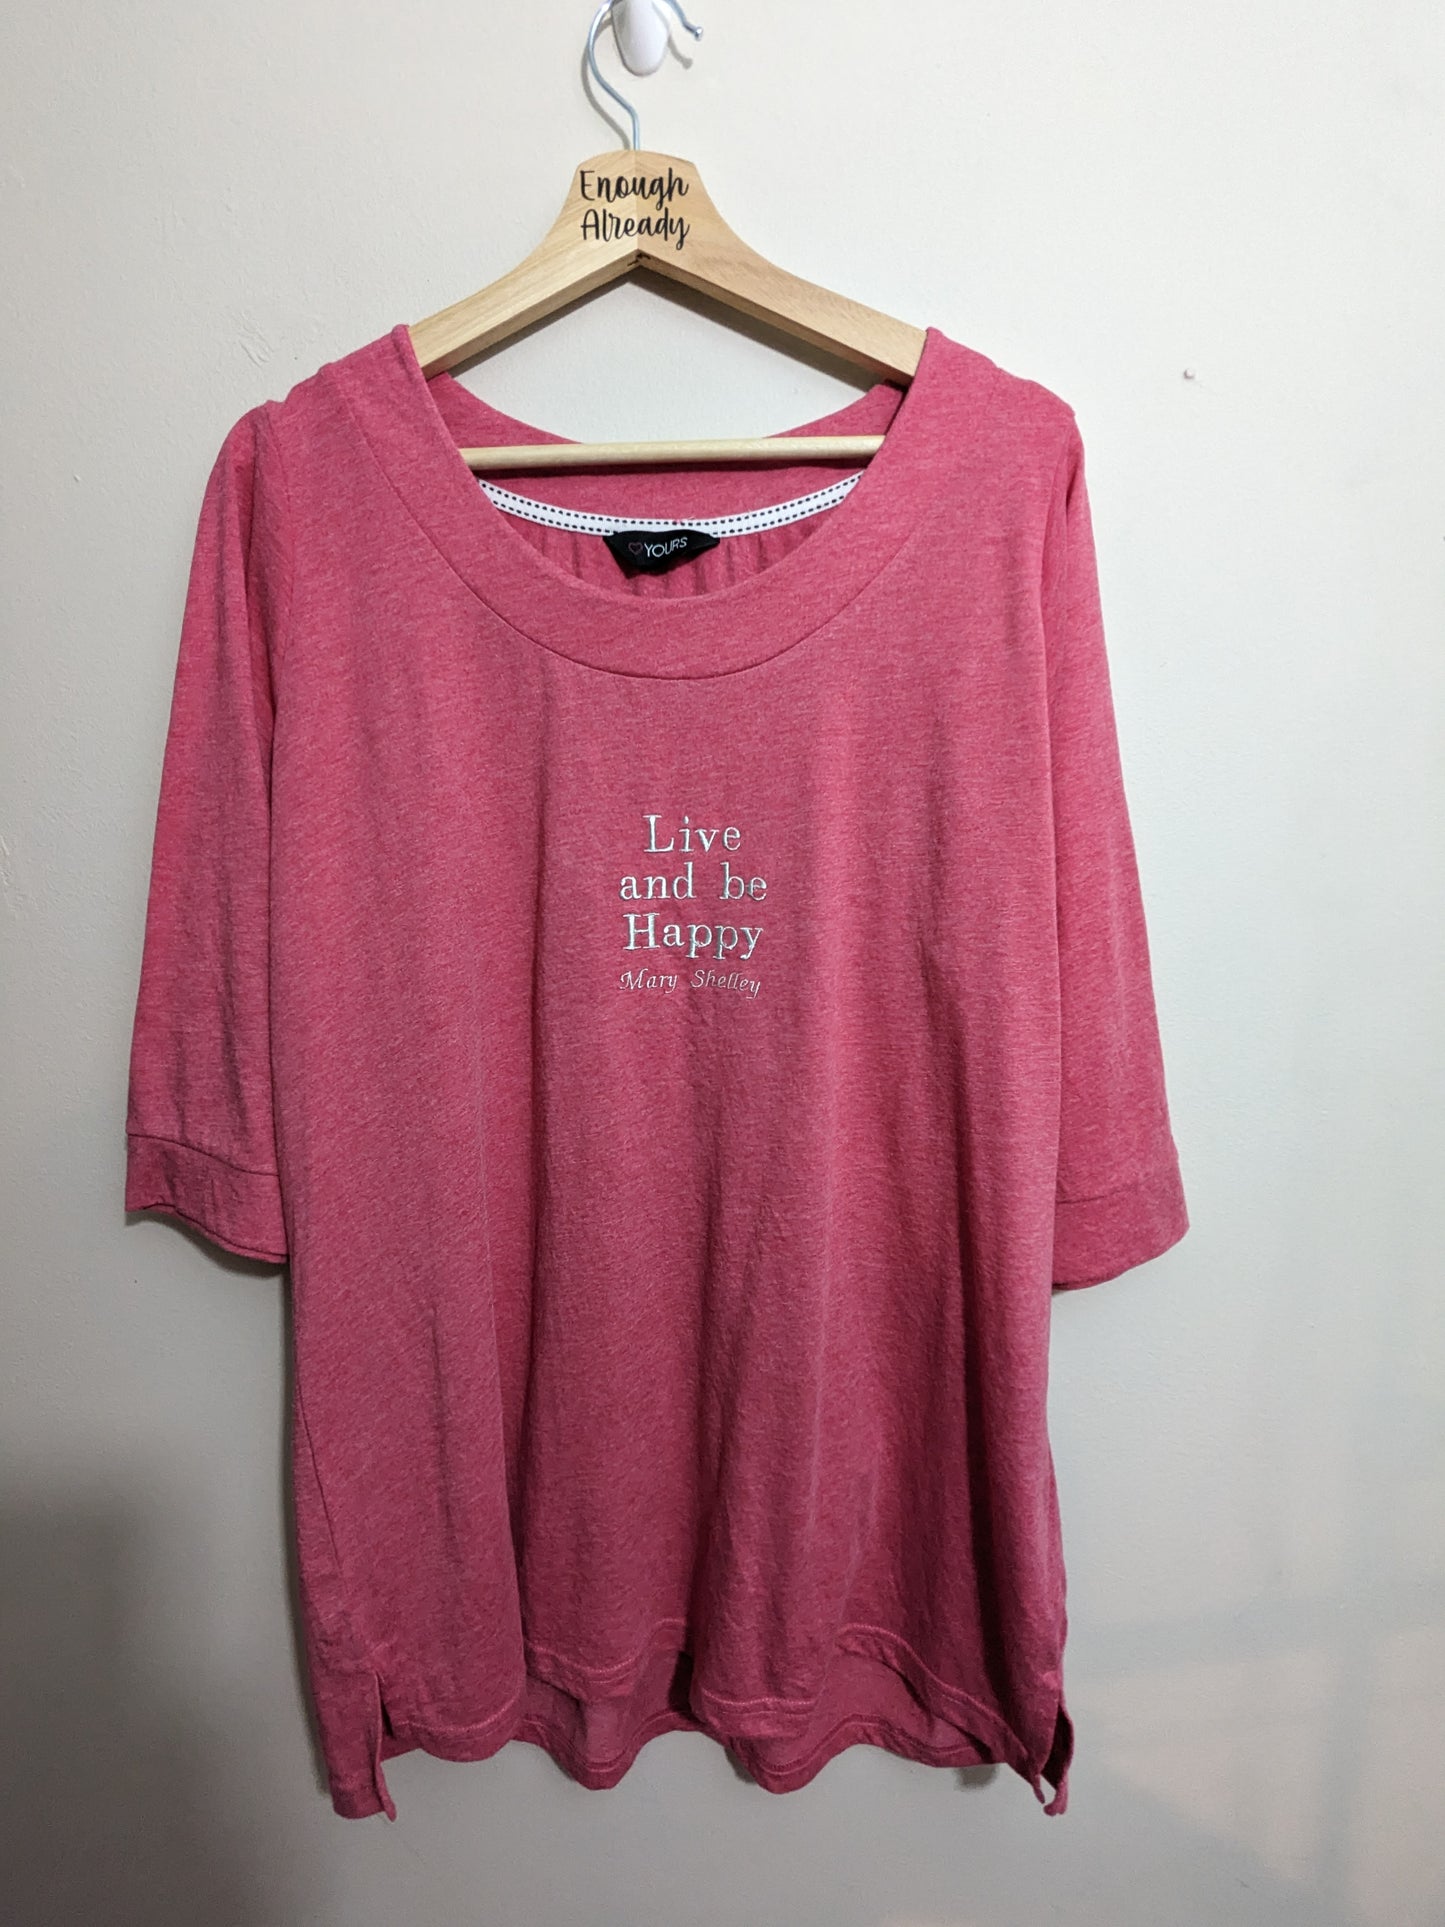 Size 20 Pink and White Embroidered Bookish Pyjama Set - Mary Shelley Literary Design